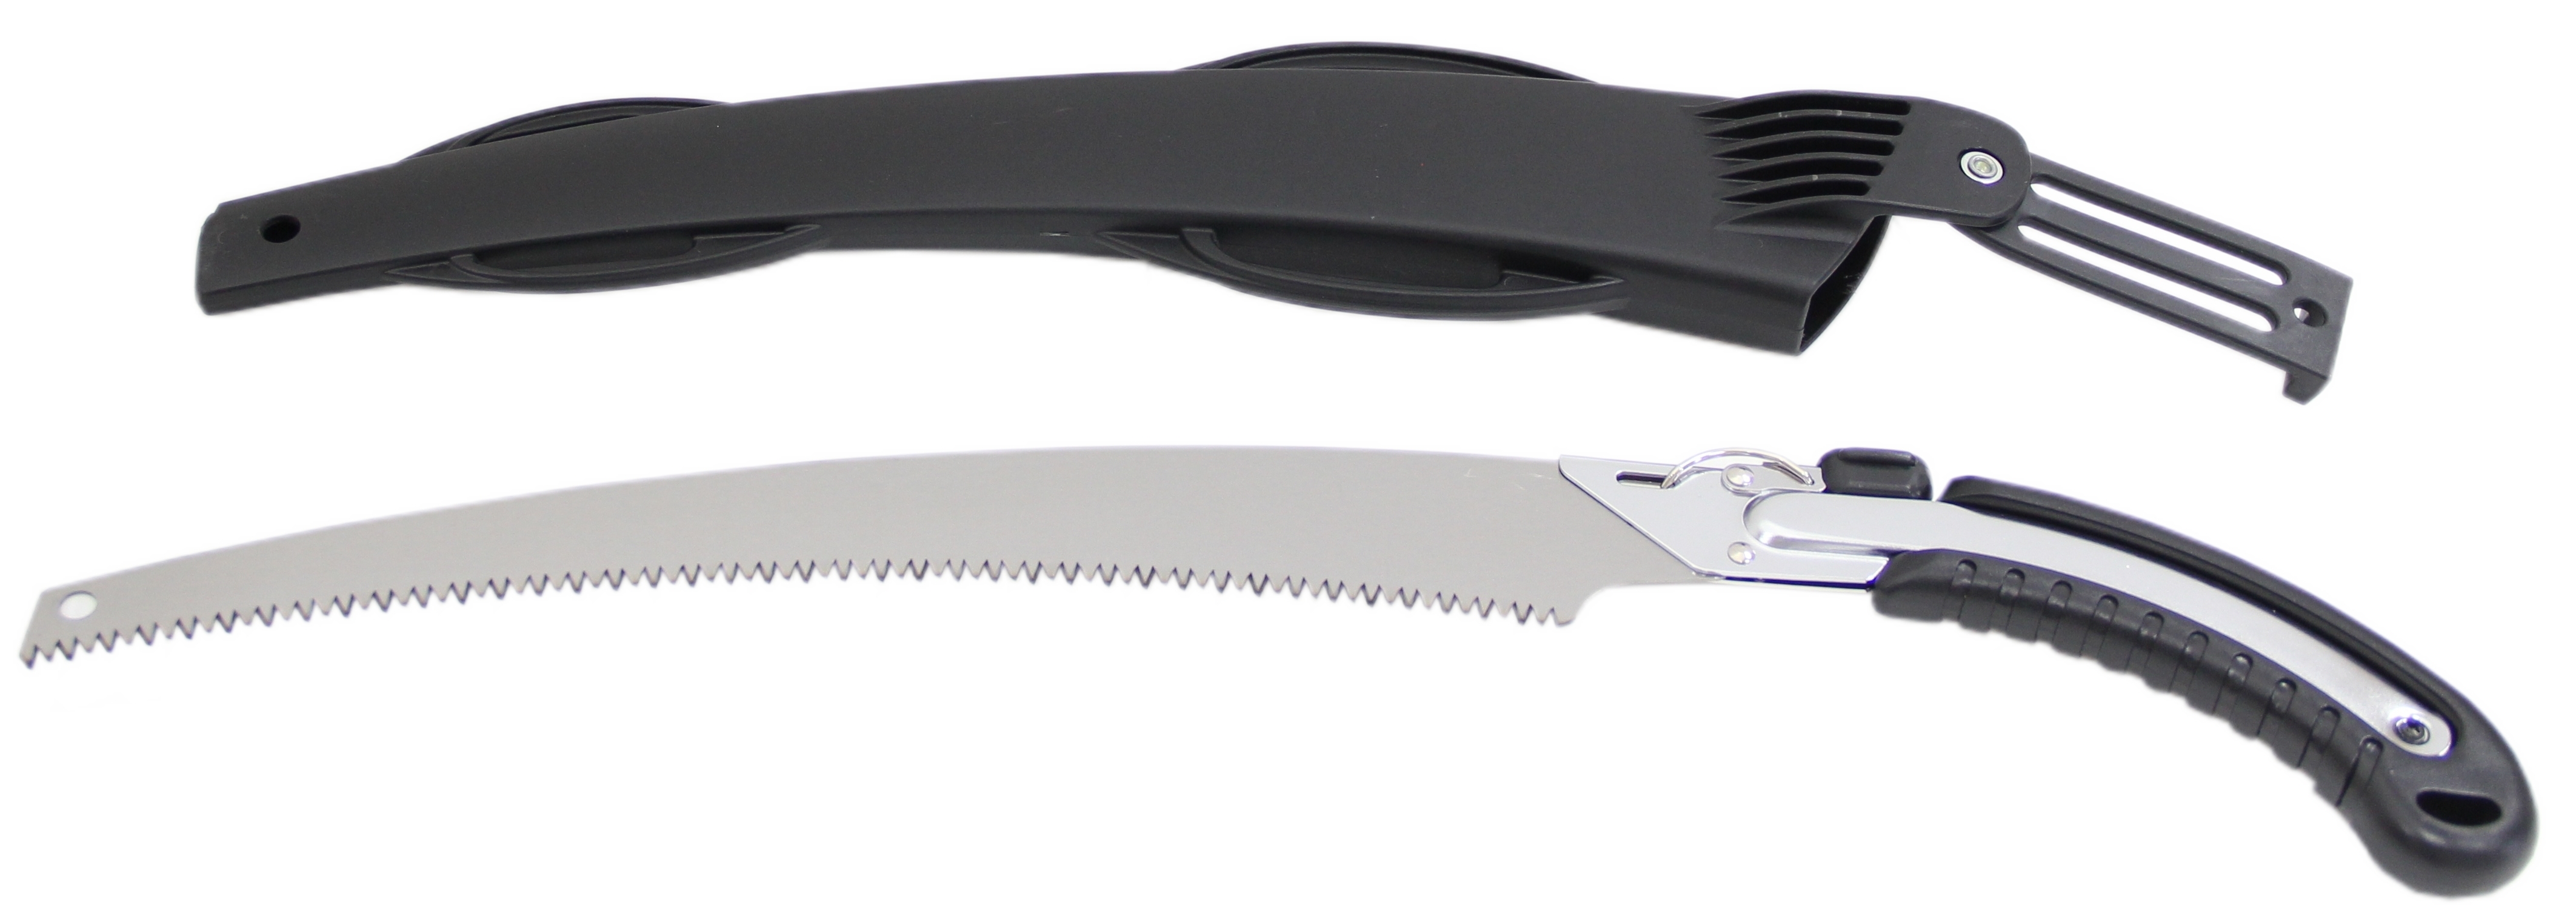 330mm Curved Pruning Saw